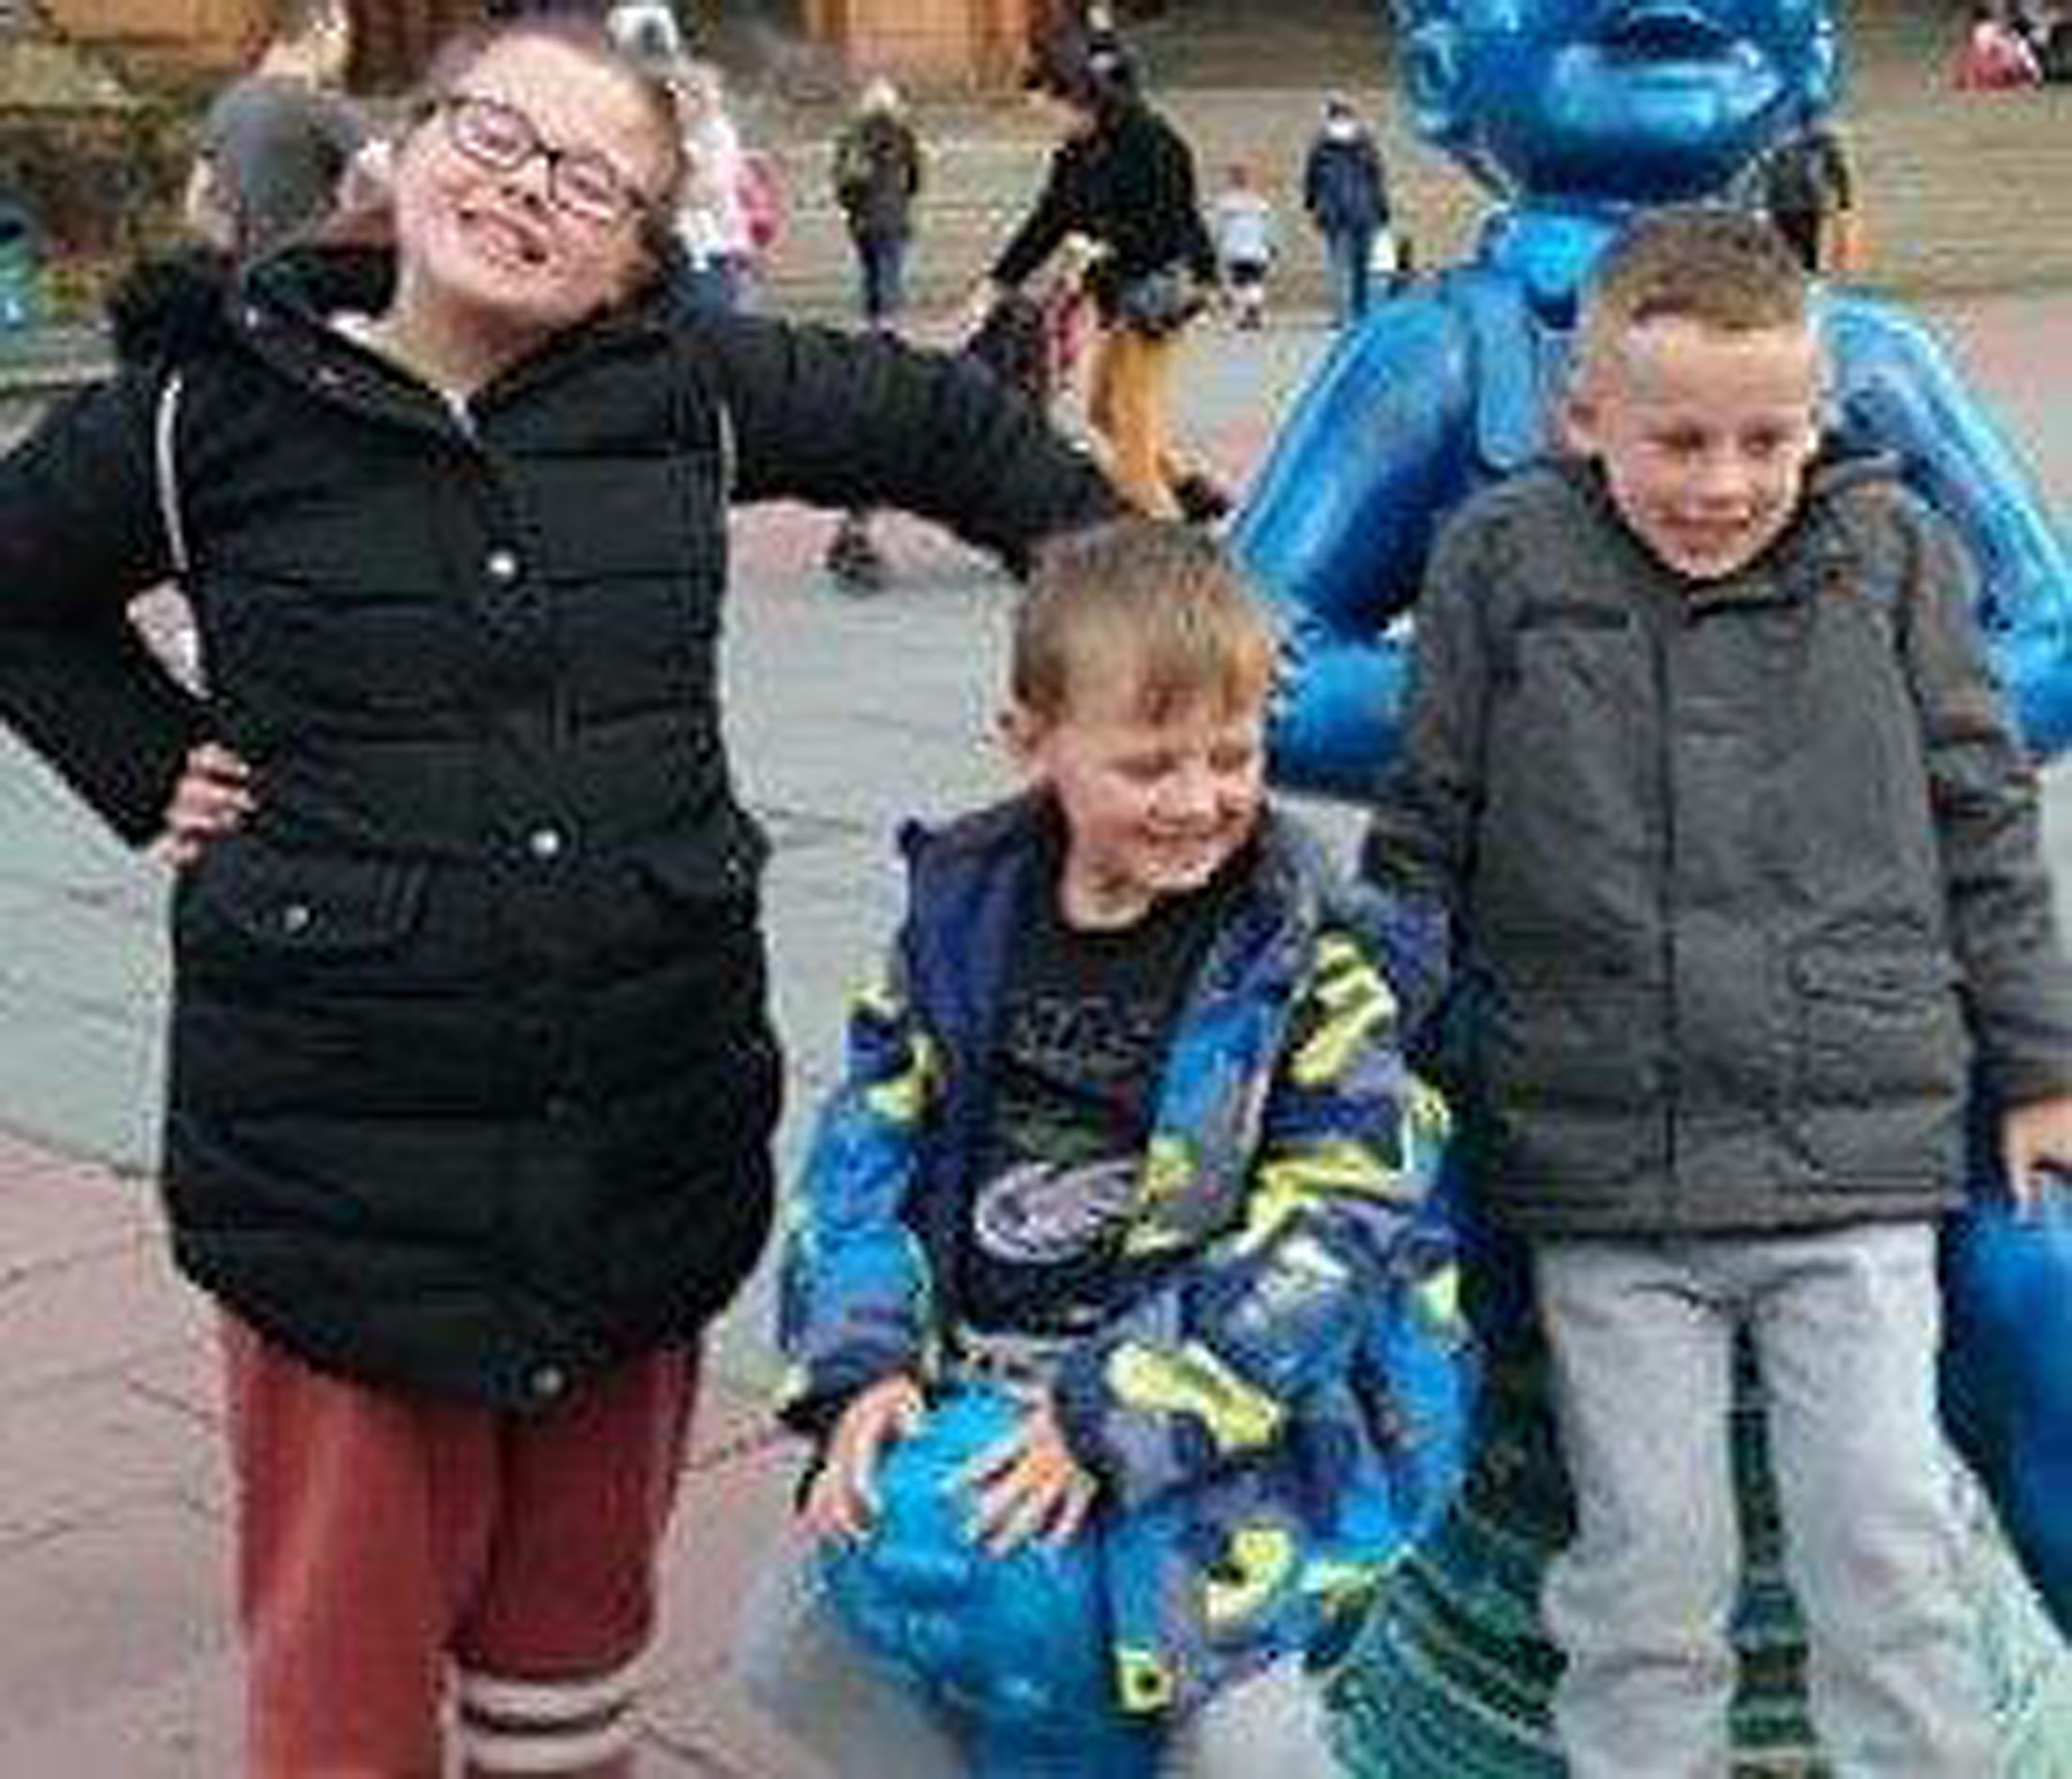 Fiona Gibson, Alexander James Gibson and Philip Gibson died in hospital after a fire (Police Scotland/PA)